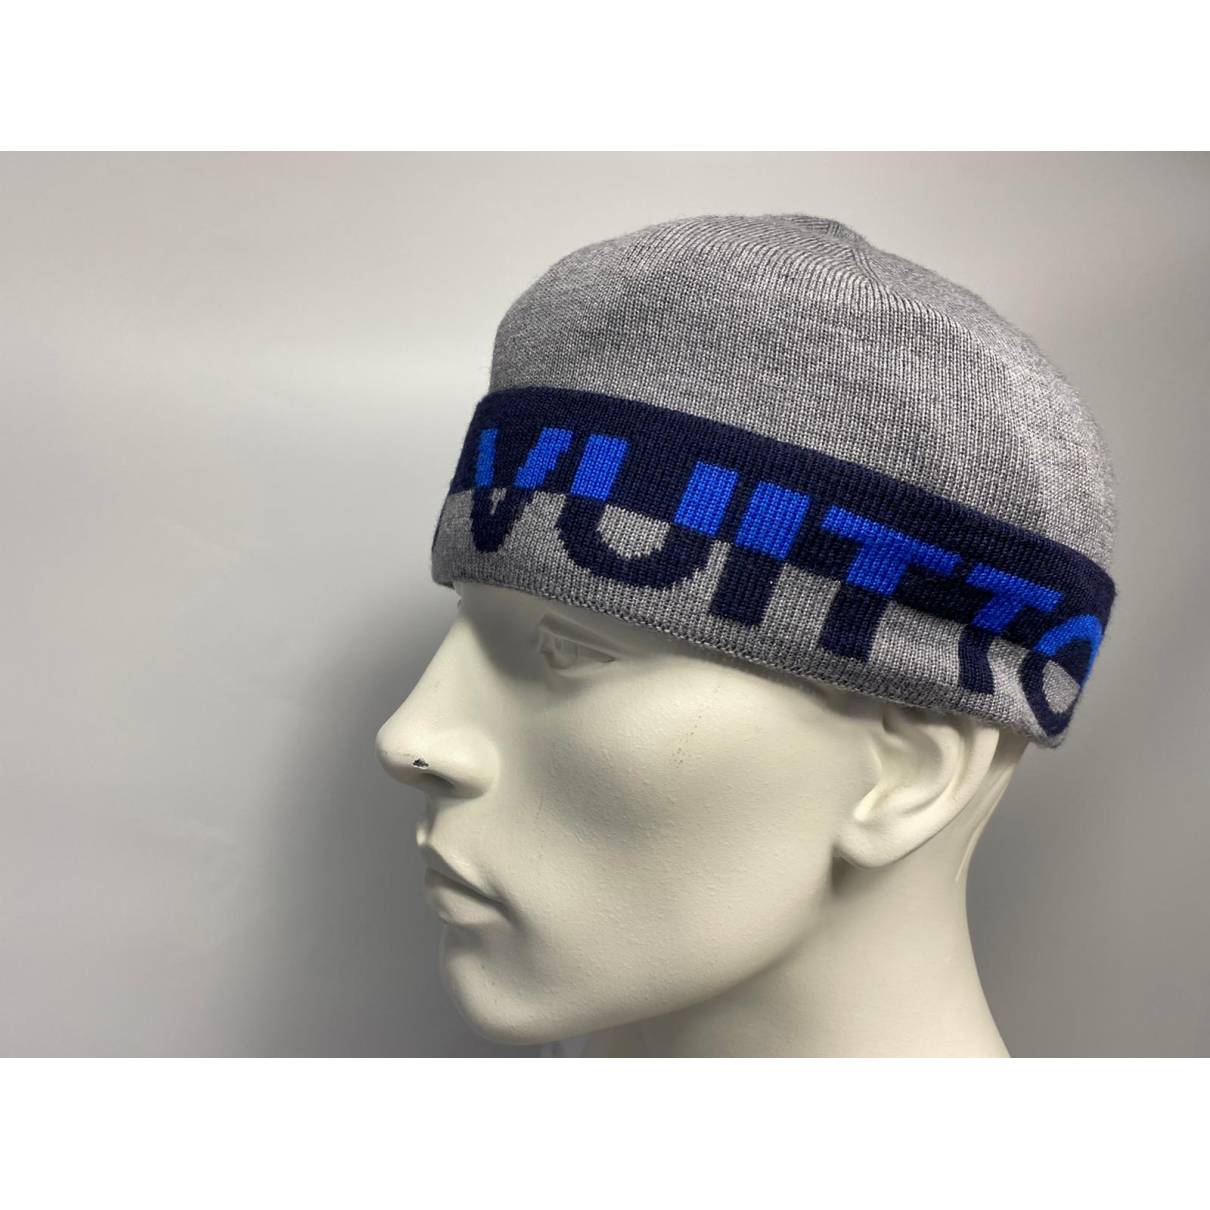 Louis Vuitton - Authenticated Hat - Wool Grey for Men, Never Worn